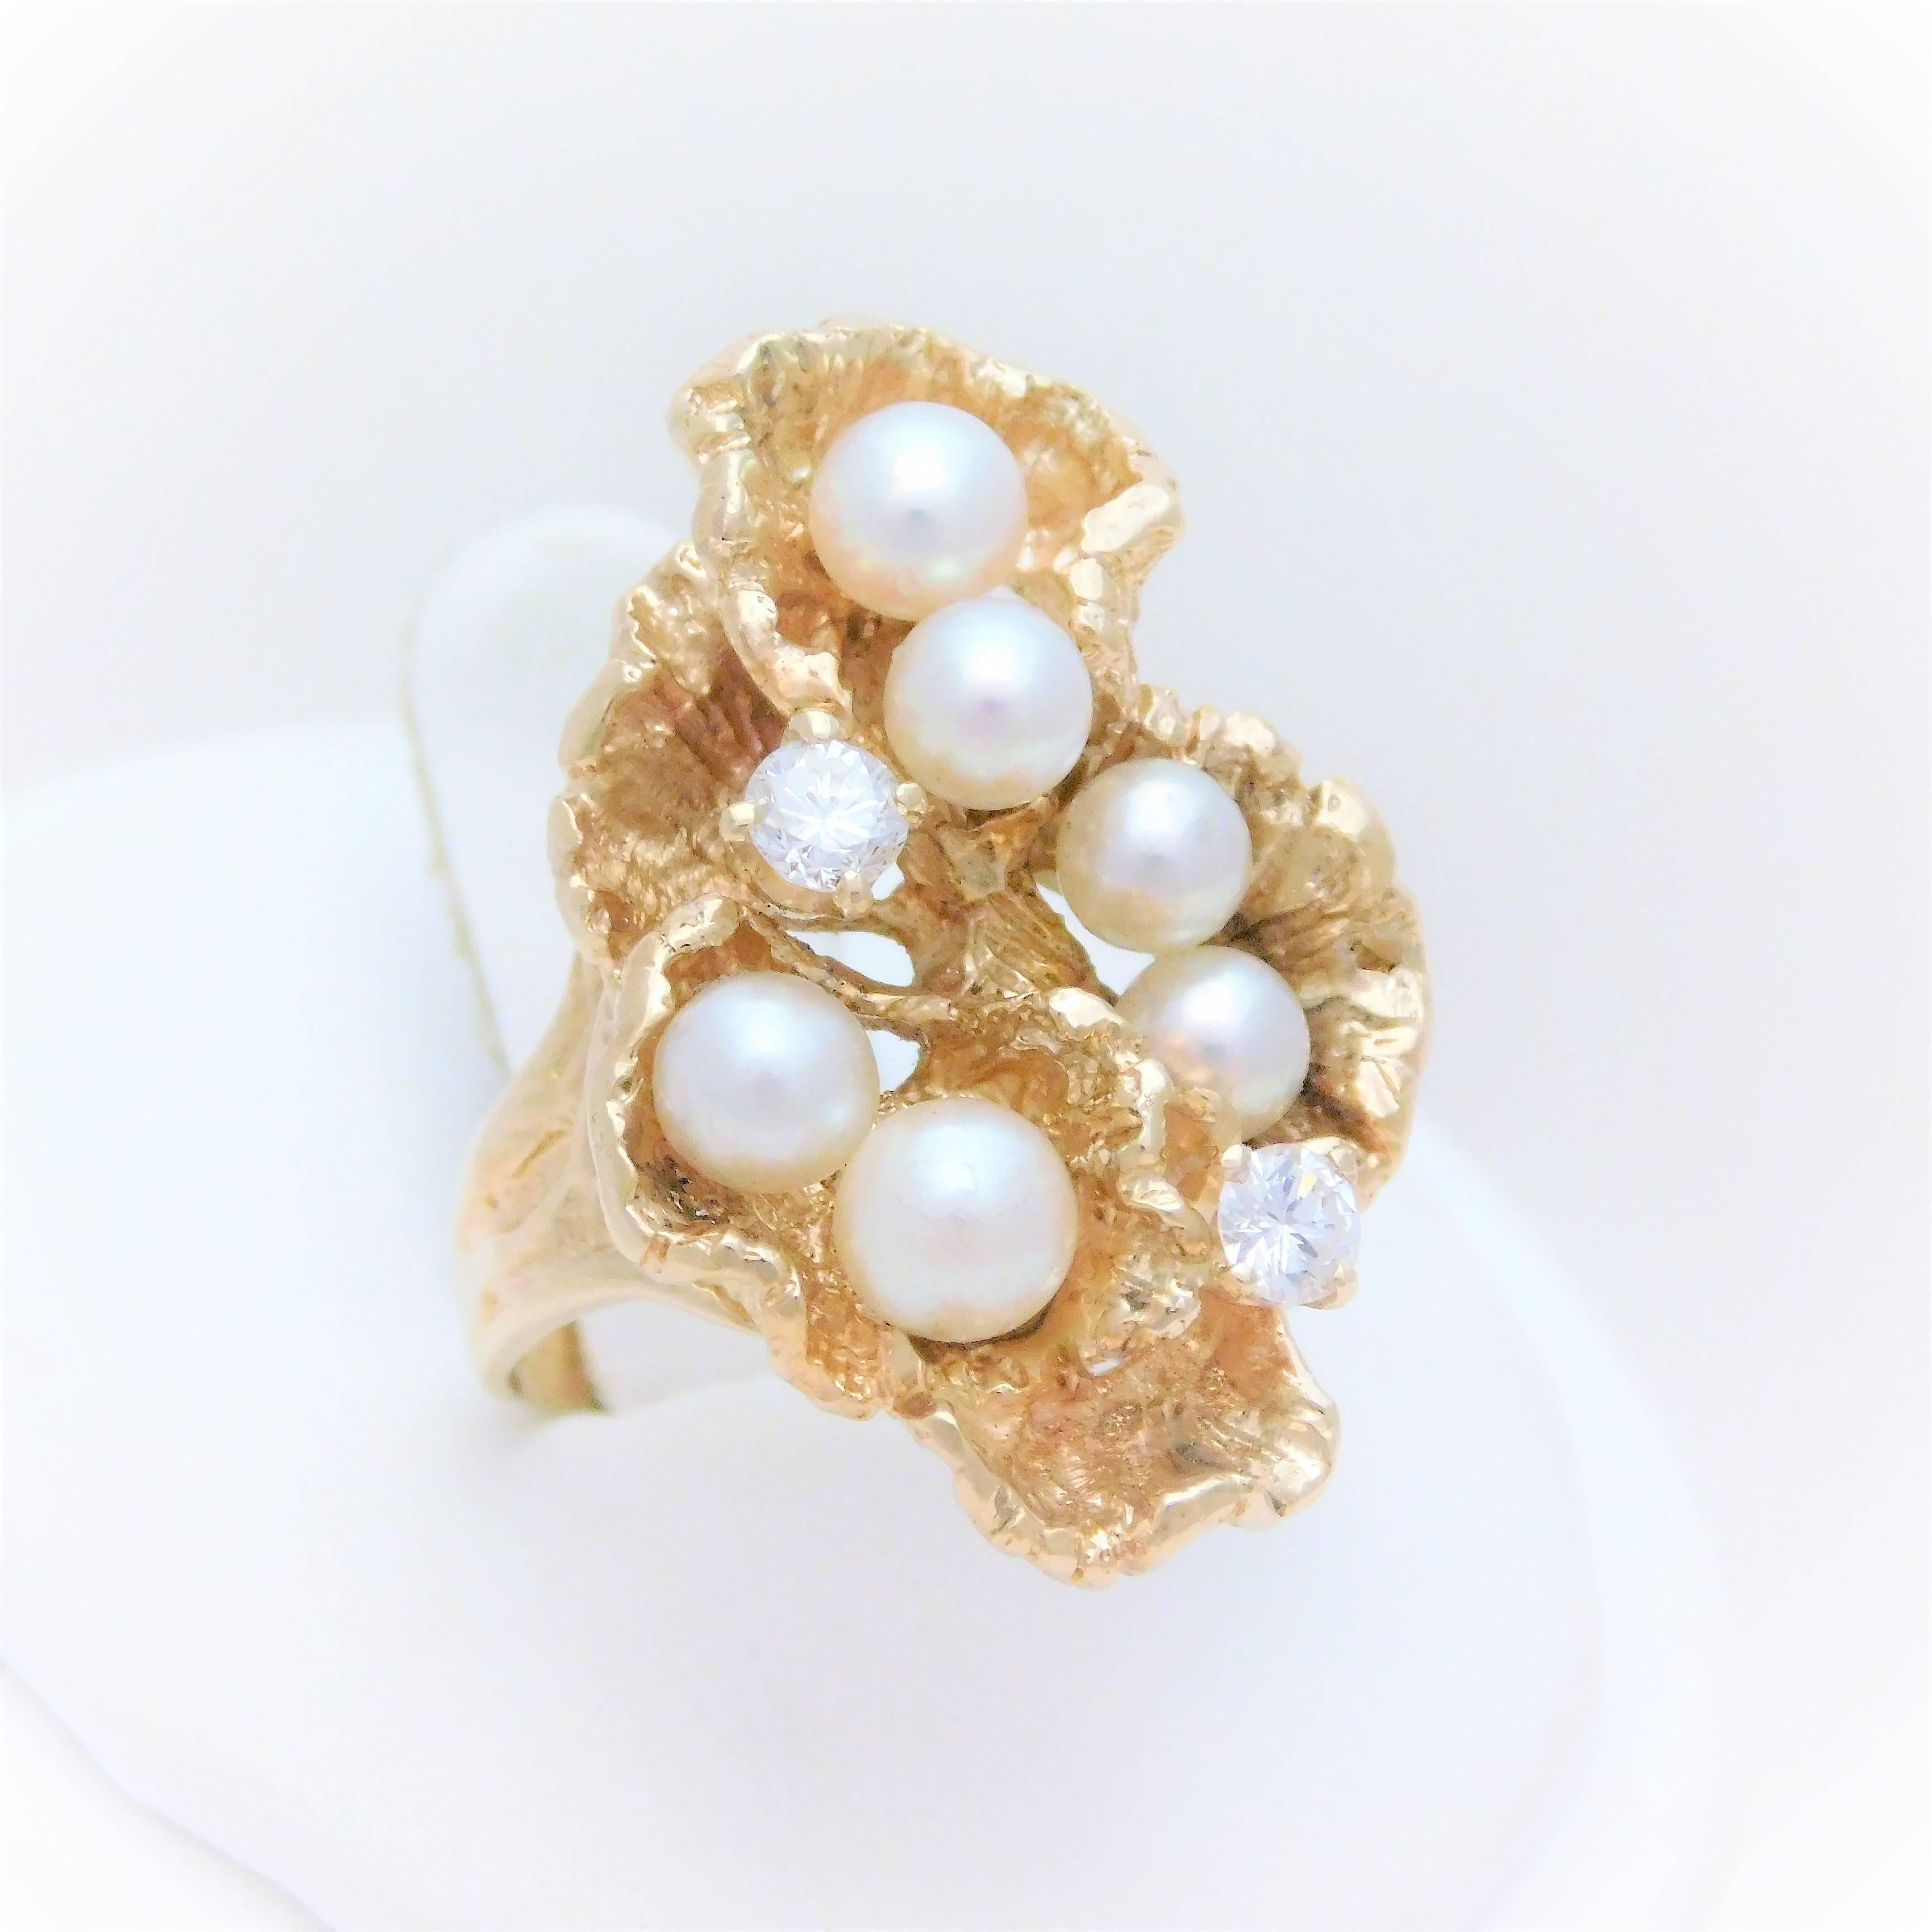 Naturally produced in the bodies of marine and freshwater mollusks.  Pearls are truly a great wonder of the world.  For hundreds of years, people have been celebrating this miraculous gemstone in jewelry works of art.  Today, the pearl is a staple